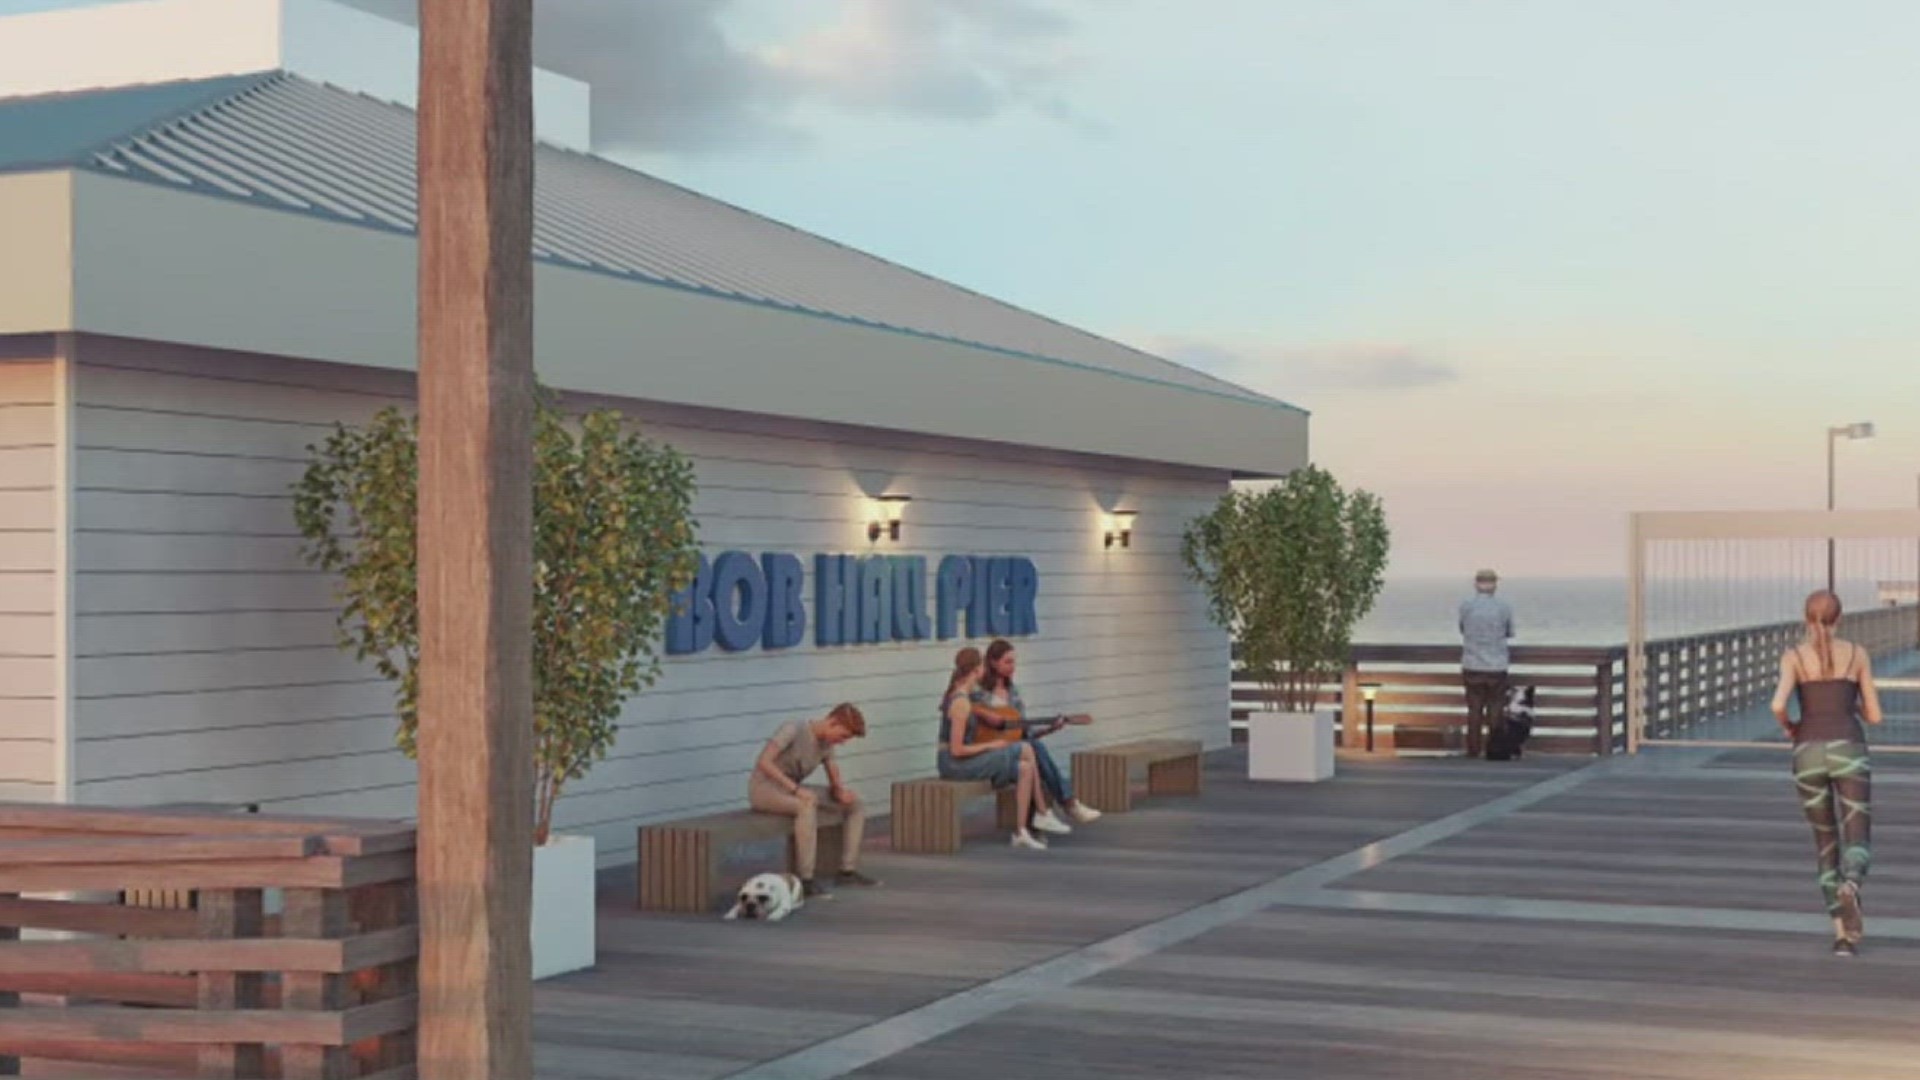 Commissioners voted to construct a section of the pier that would permit the addition of a restaurant in the future.